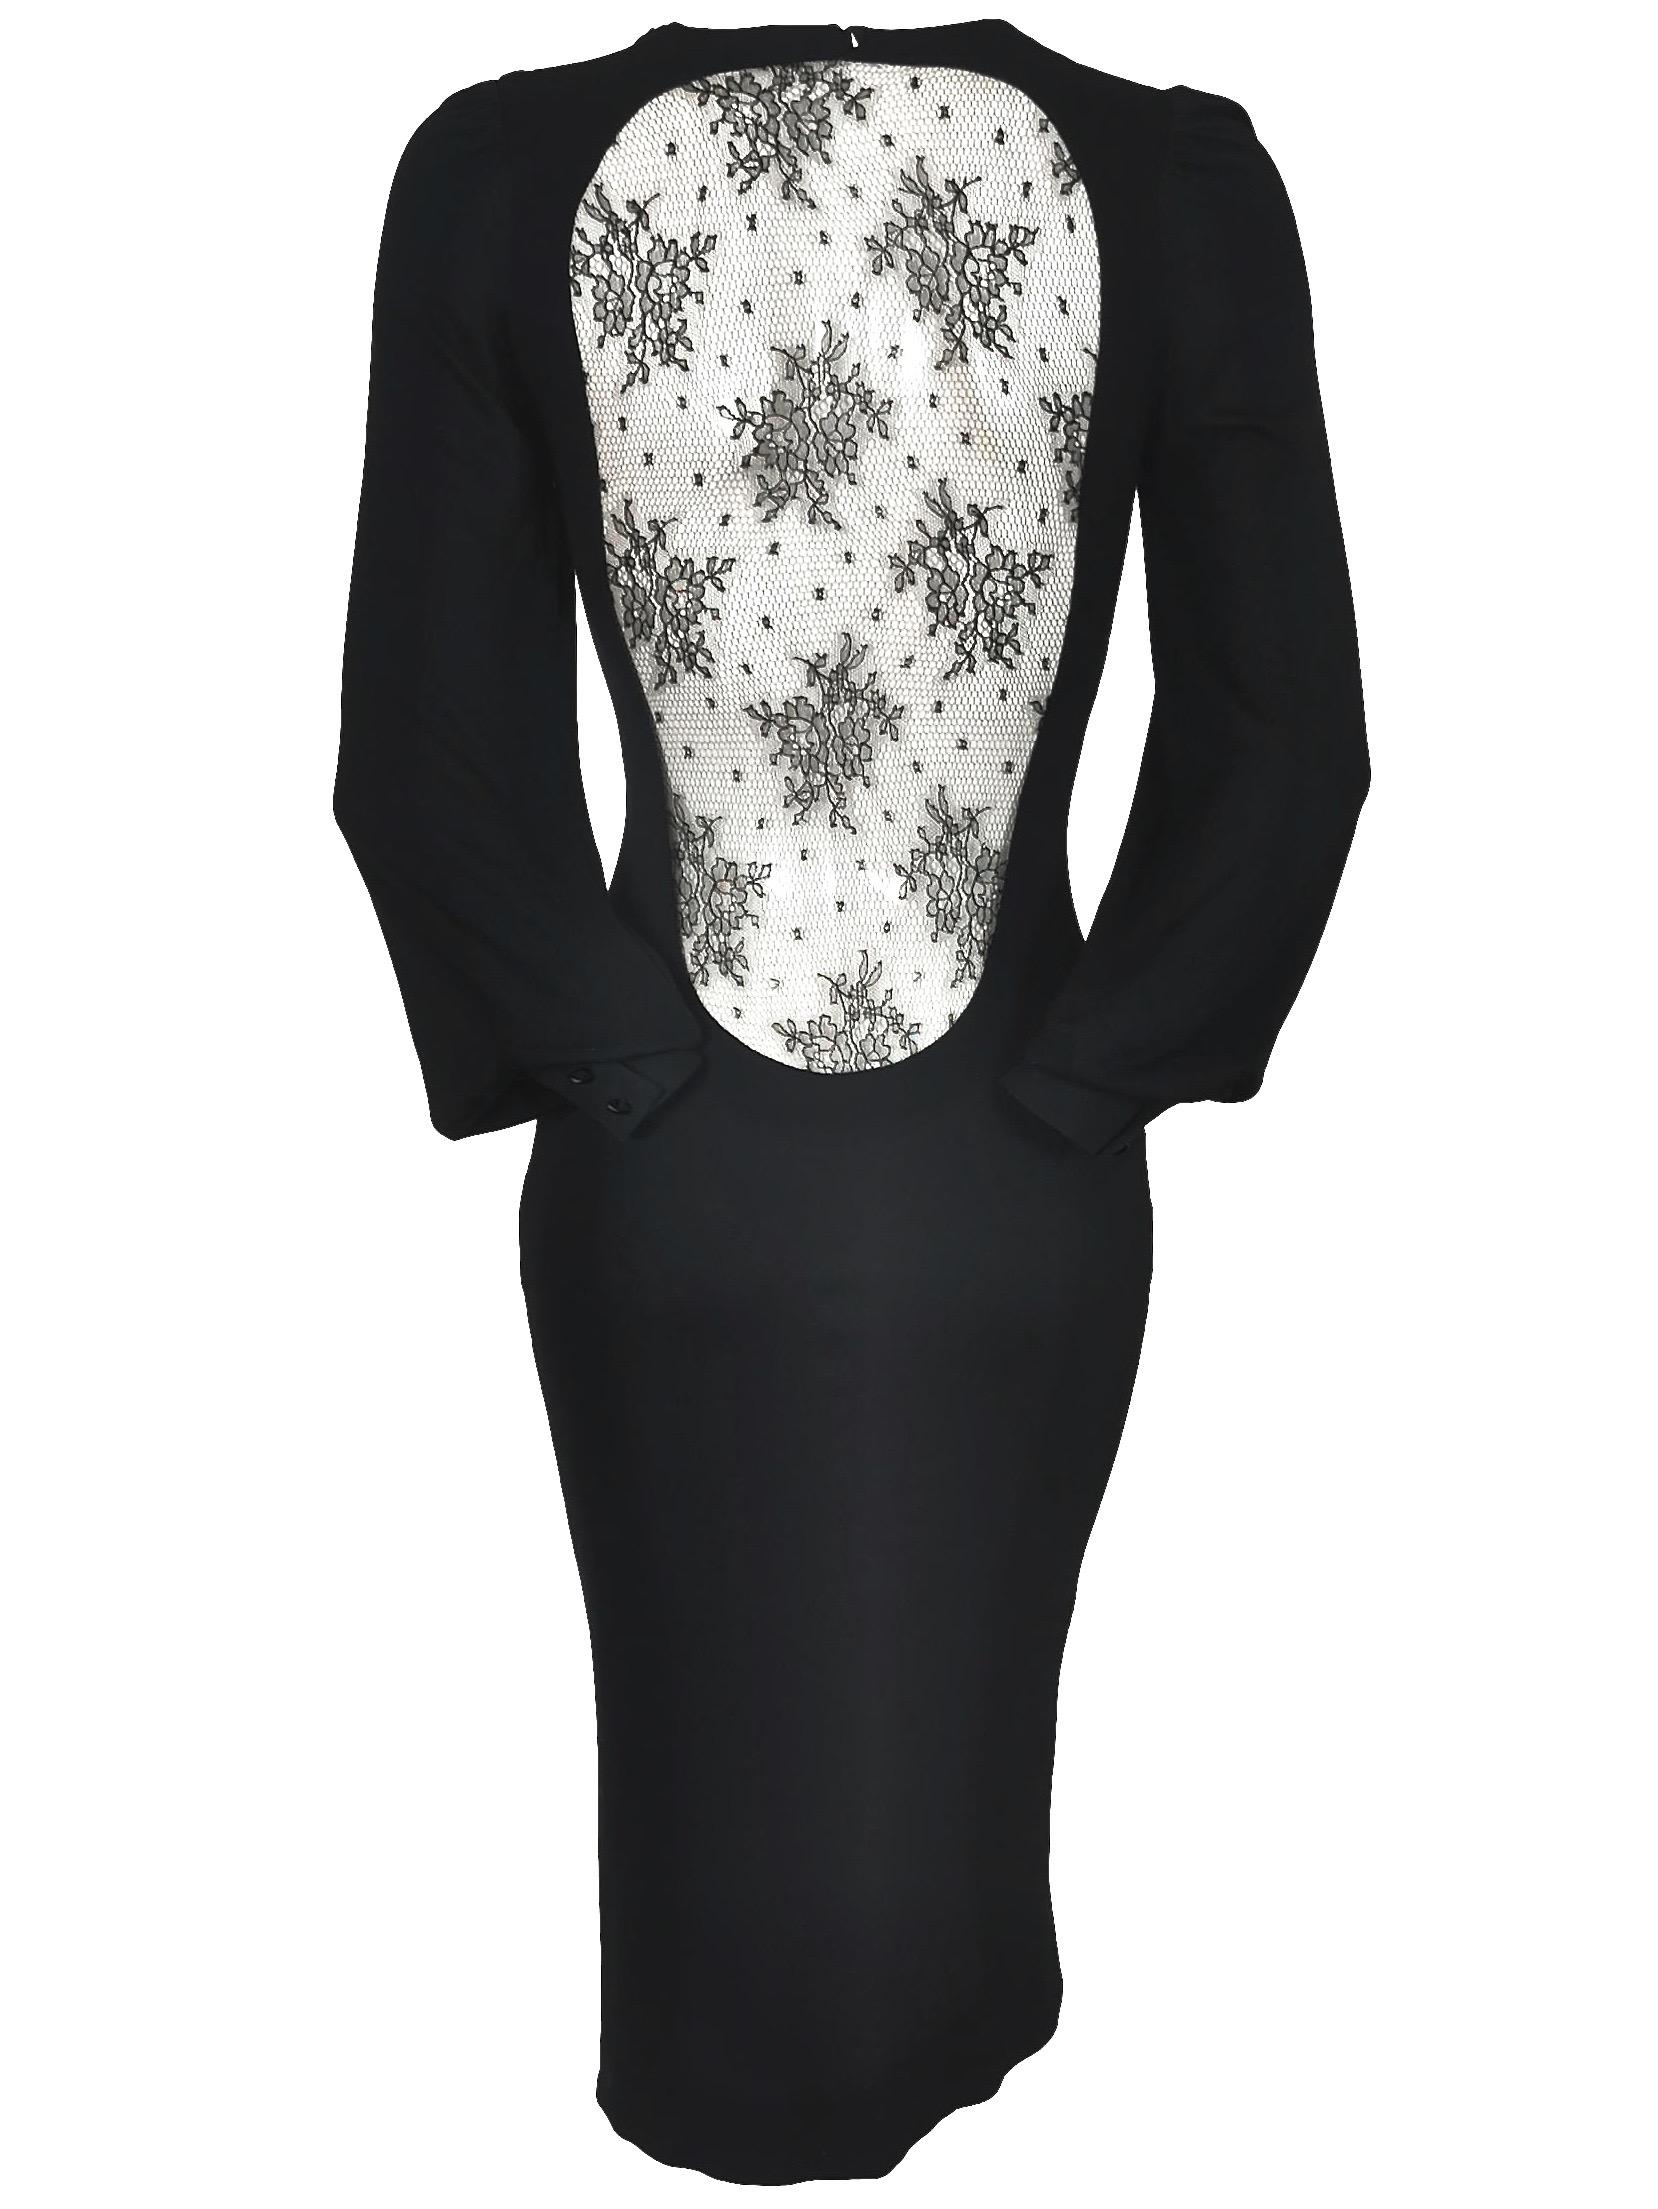 Black Alexander McQueen 2005 Lace Back Fitted Dress